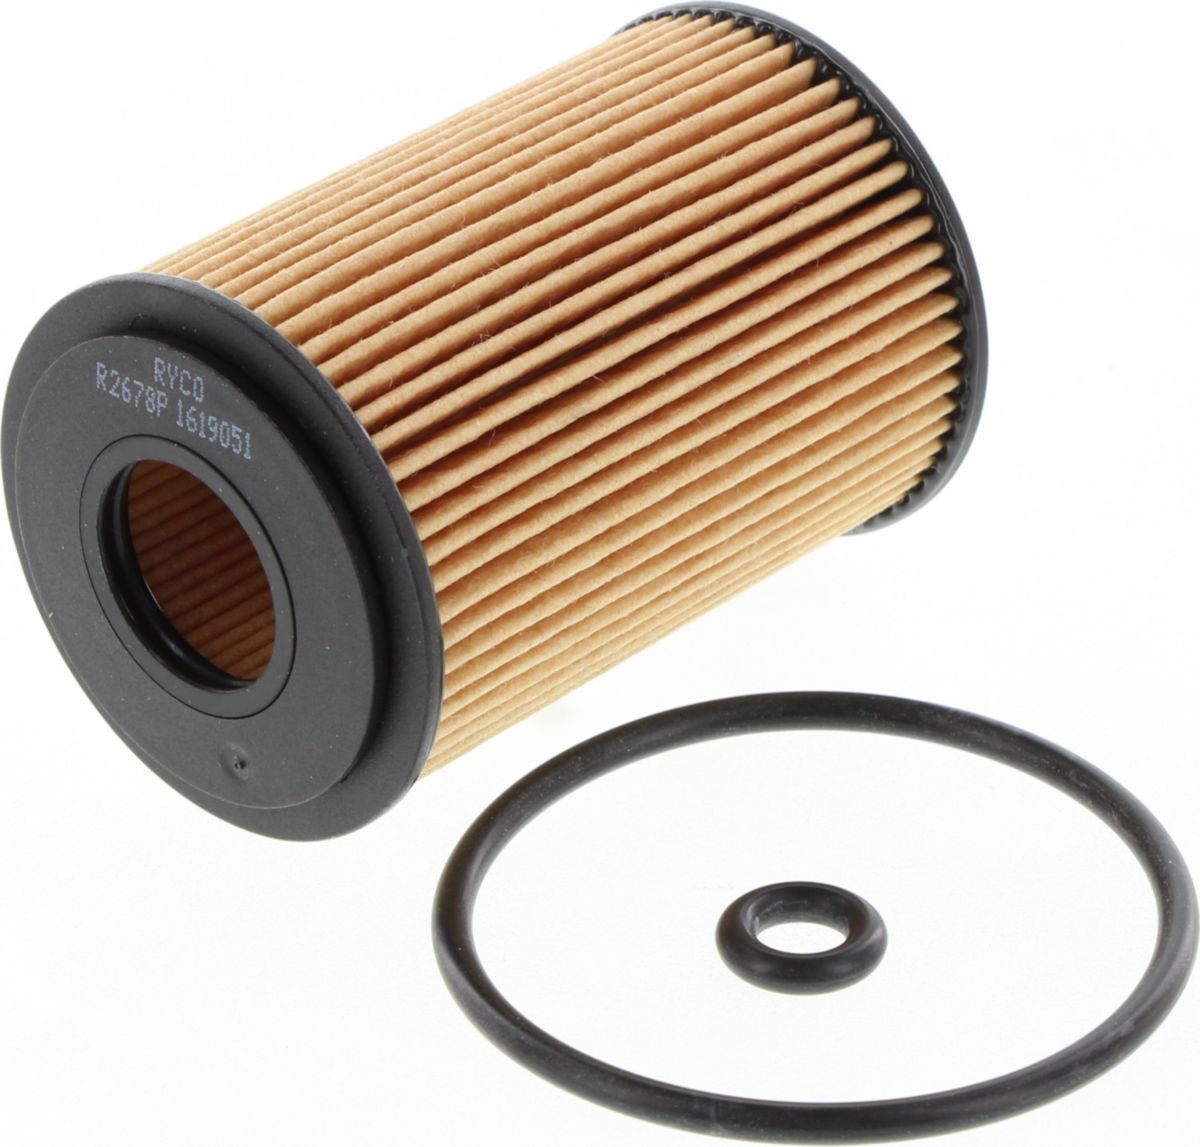 RYCO OIL FILTER CARTRIDGE R2678P FOR MERCEDES A140 W168